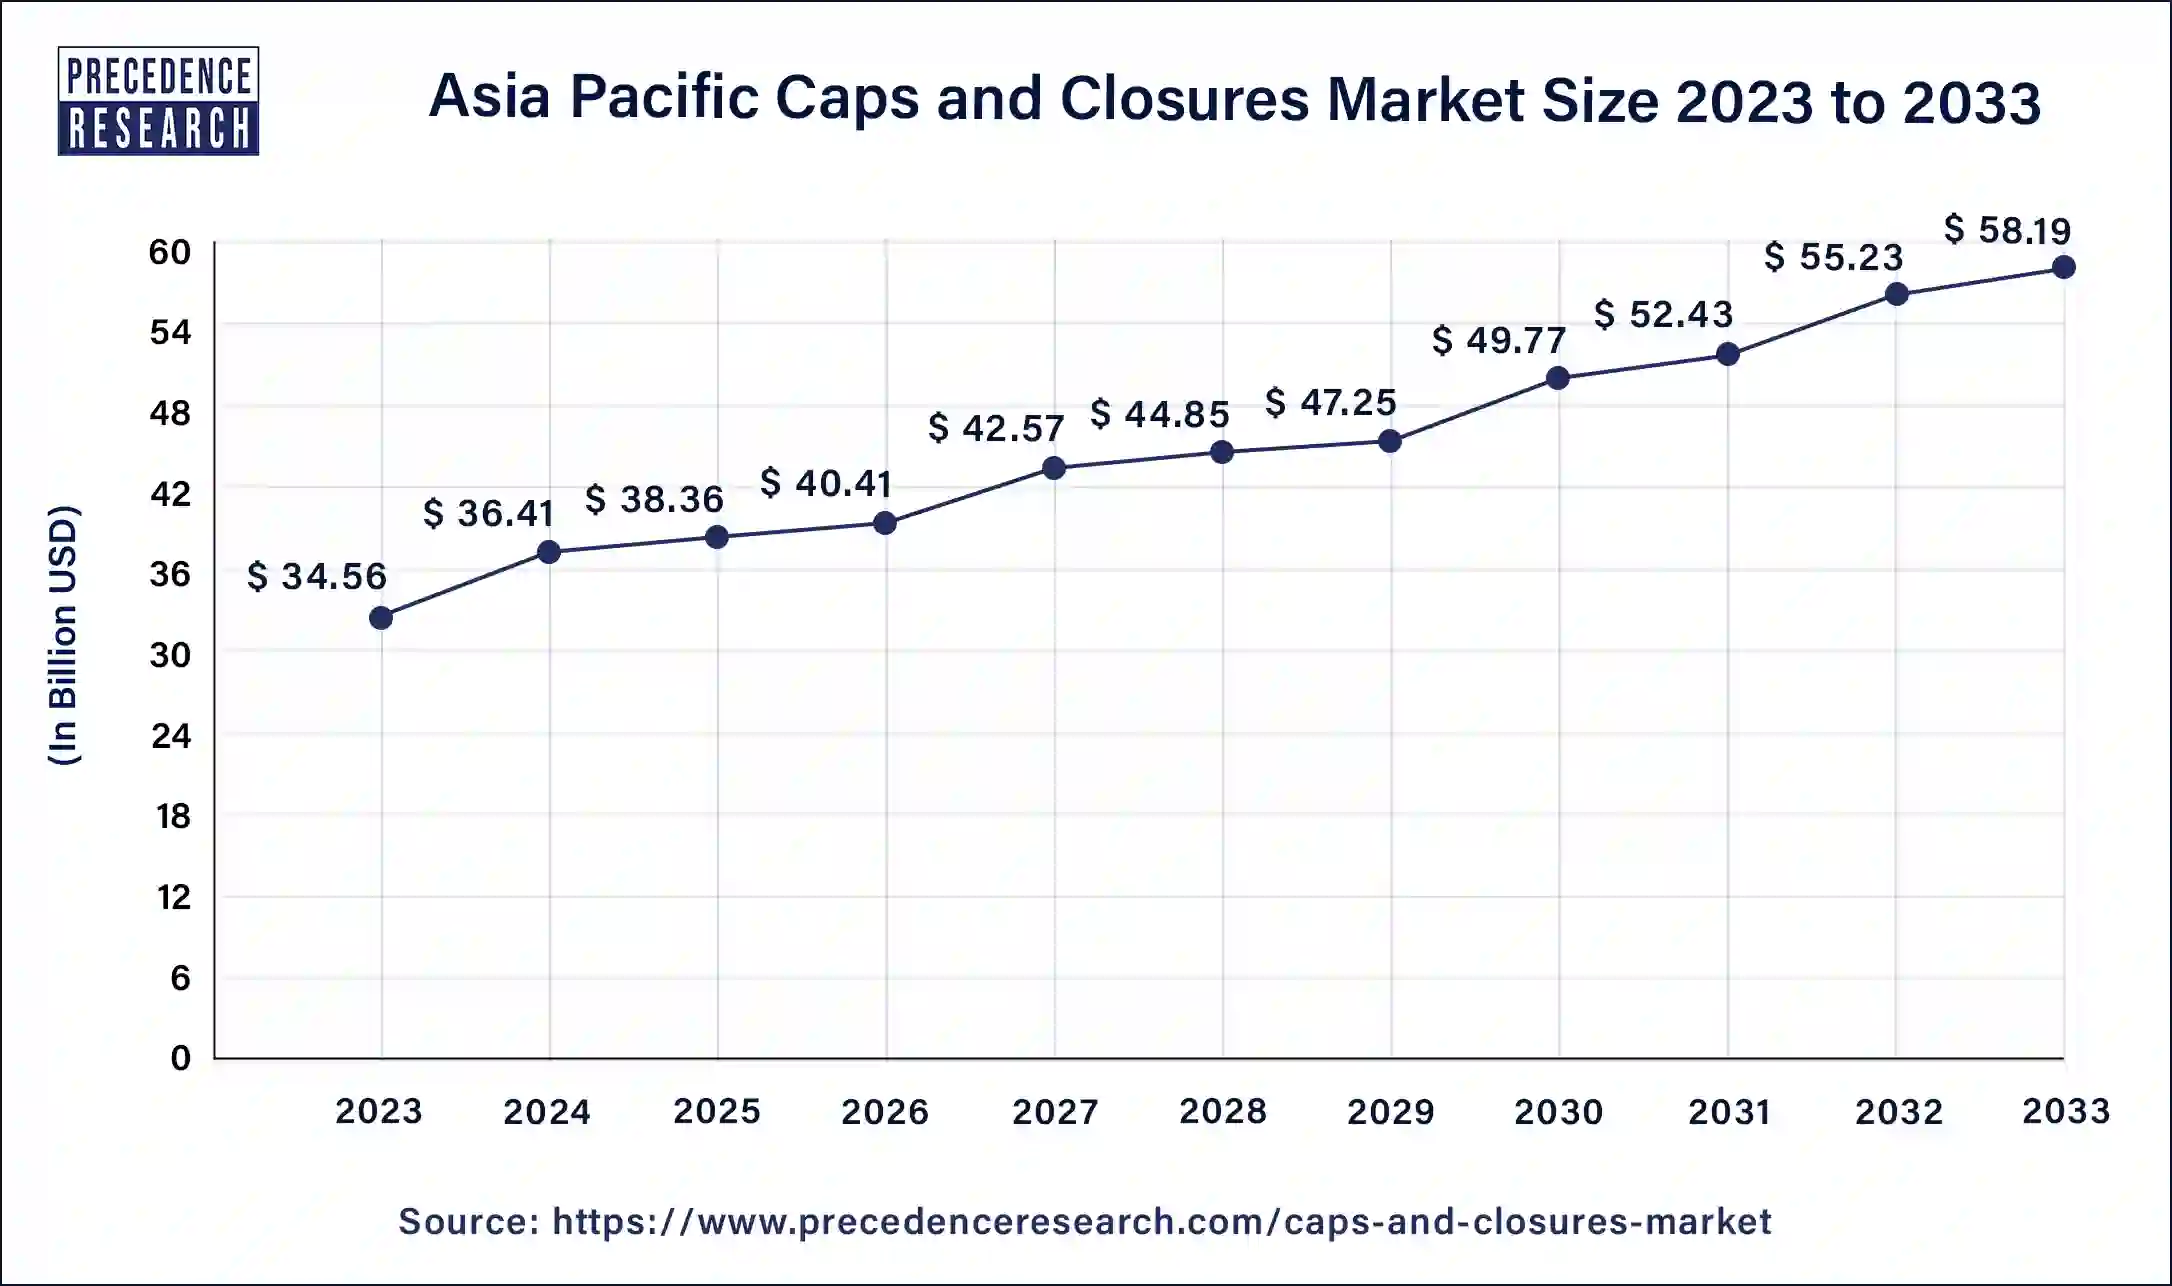 Asia Pacific Caps and Closures Market Size 2024 to 2033